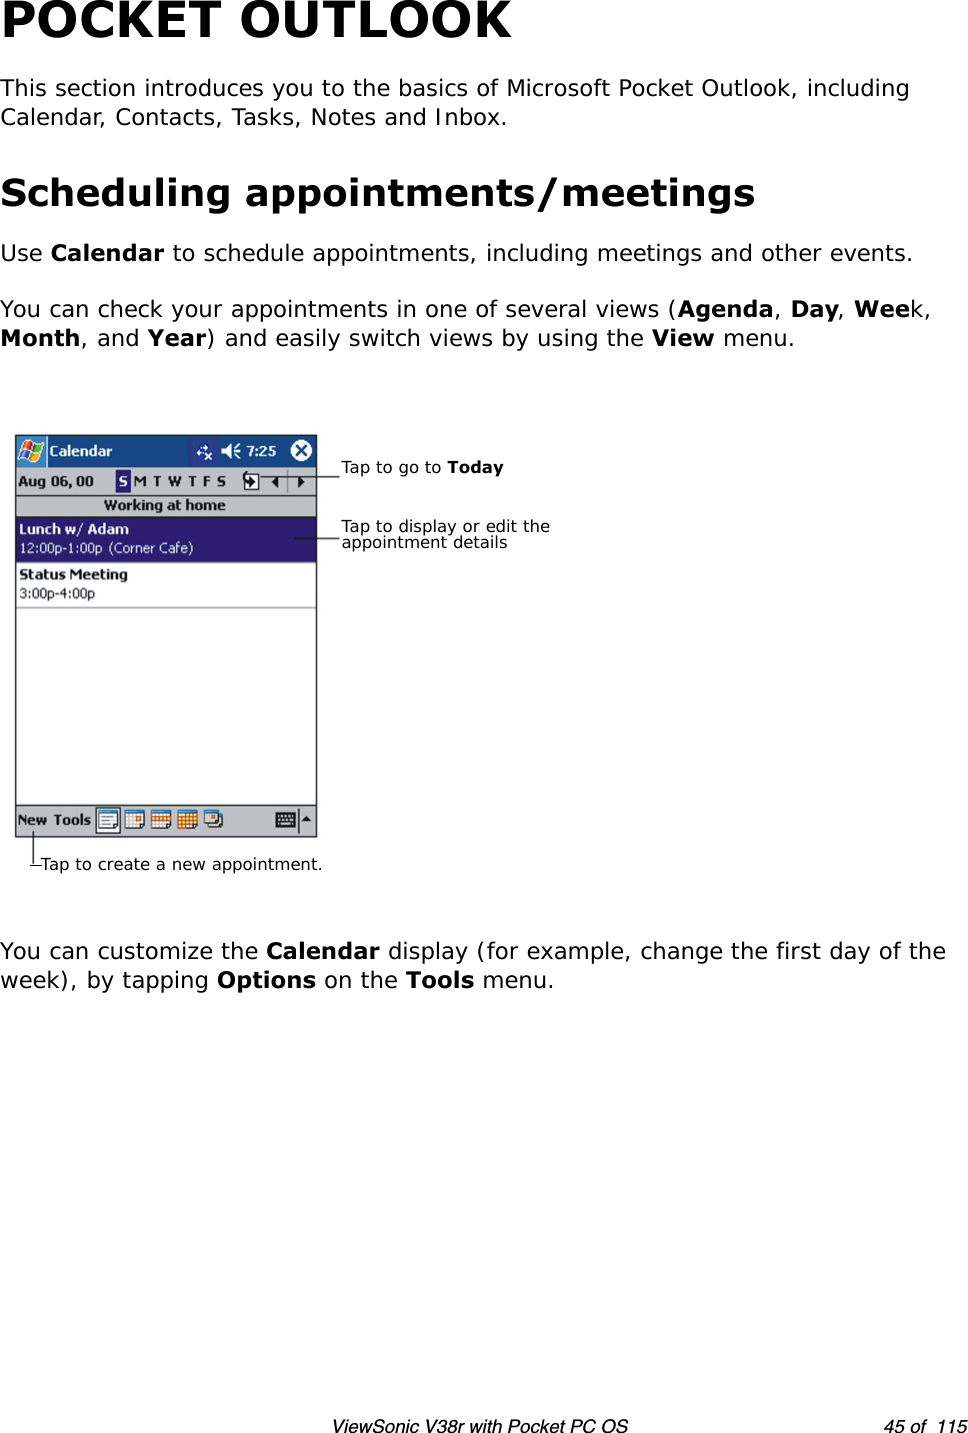 ViewSonic V38r with Pocket PC OS 45 of  115POCKET OUTLOOKThis section introduces you to the basics of Microsoft Pocket Outlook, including Calendar, Contacts, Tasks, Notes and Inbox.Scheduling appointments/meetingsUse Calendar to schedule appointments, including meetings and other events.You can check your appointments in one of several views (Agenda, Day, Week, Month, and Year) and easily switch views by using the View menu.You can customize the Calendar display (for example, change the first day of the week), by tapping Options on the Tools menu. Tap to go to TodayTap to display or edit the appointment detailsTap to create a new appointment.